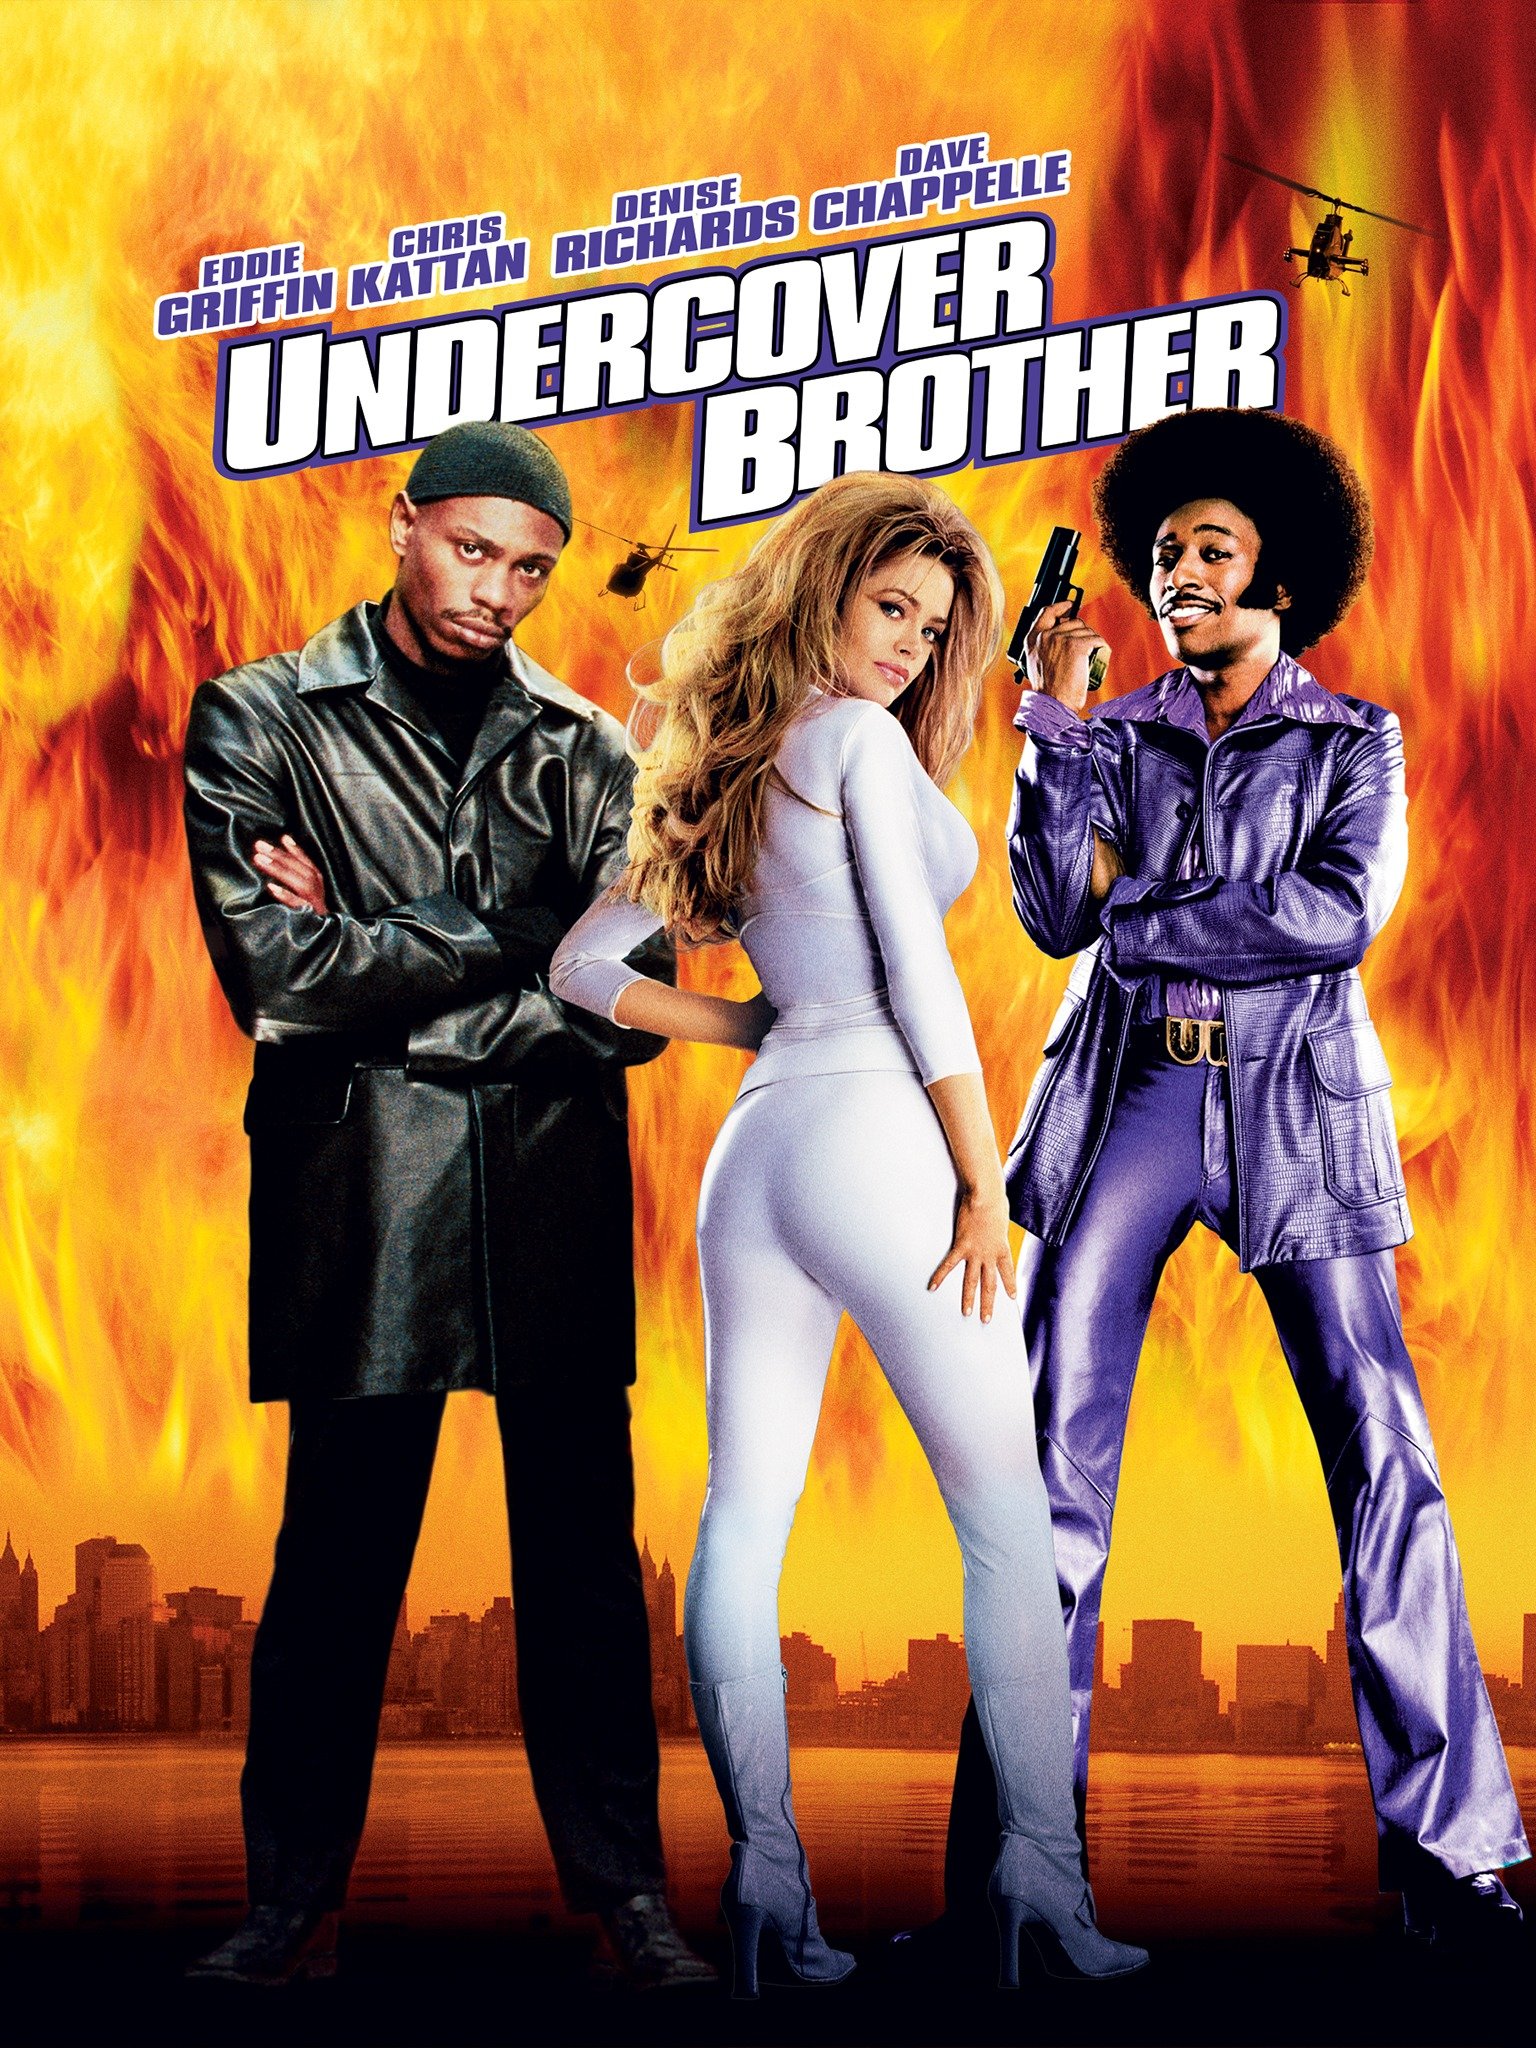 who wrote undercover brother